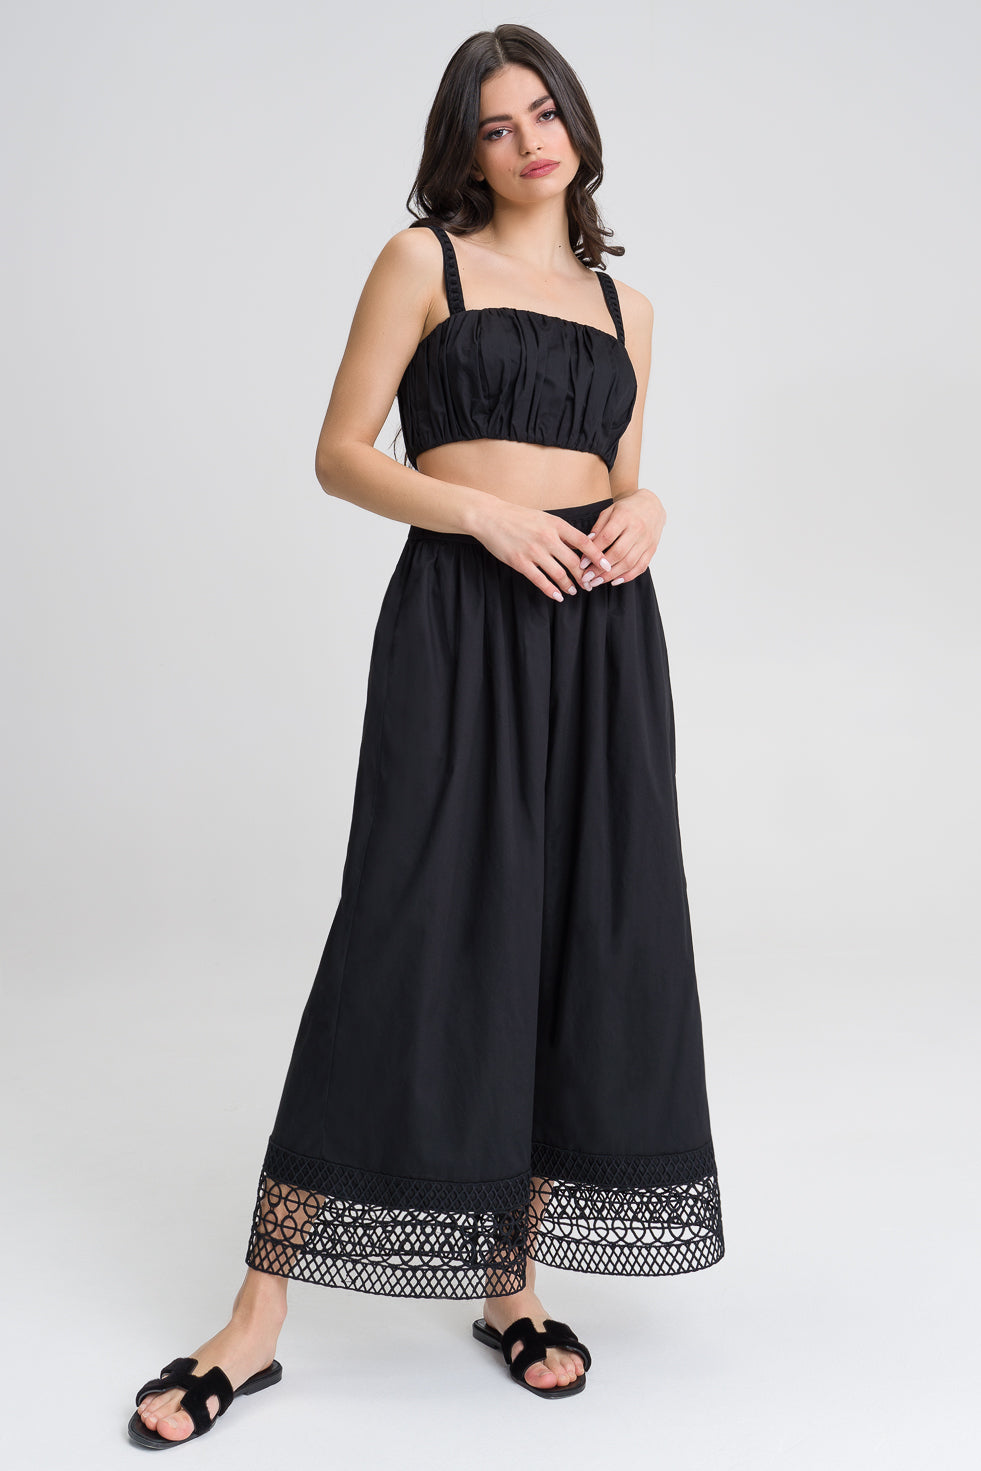 Sadie Black cotton blend embroided wide pants